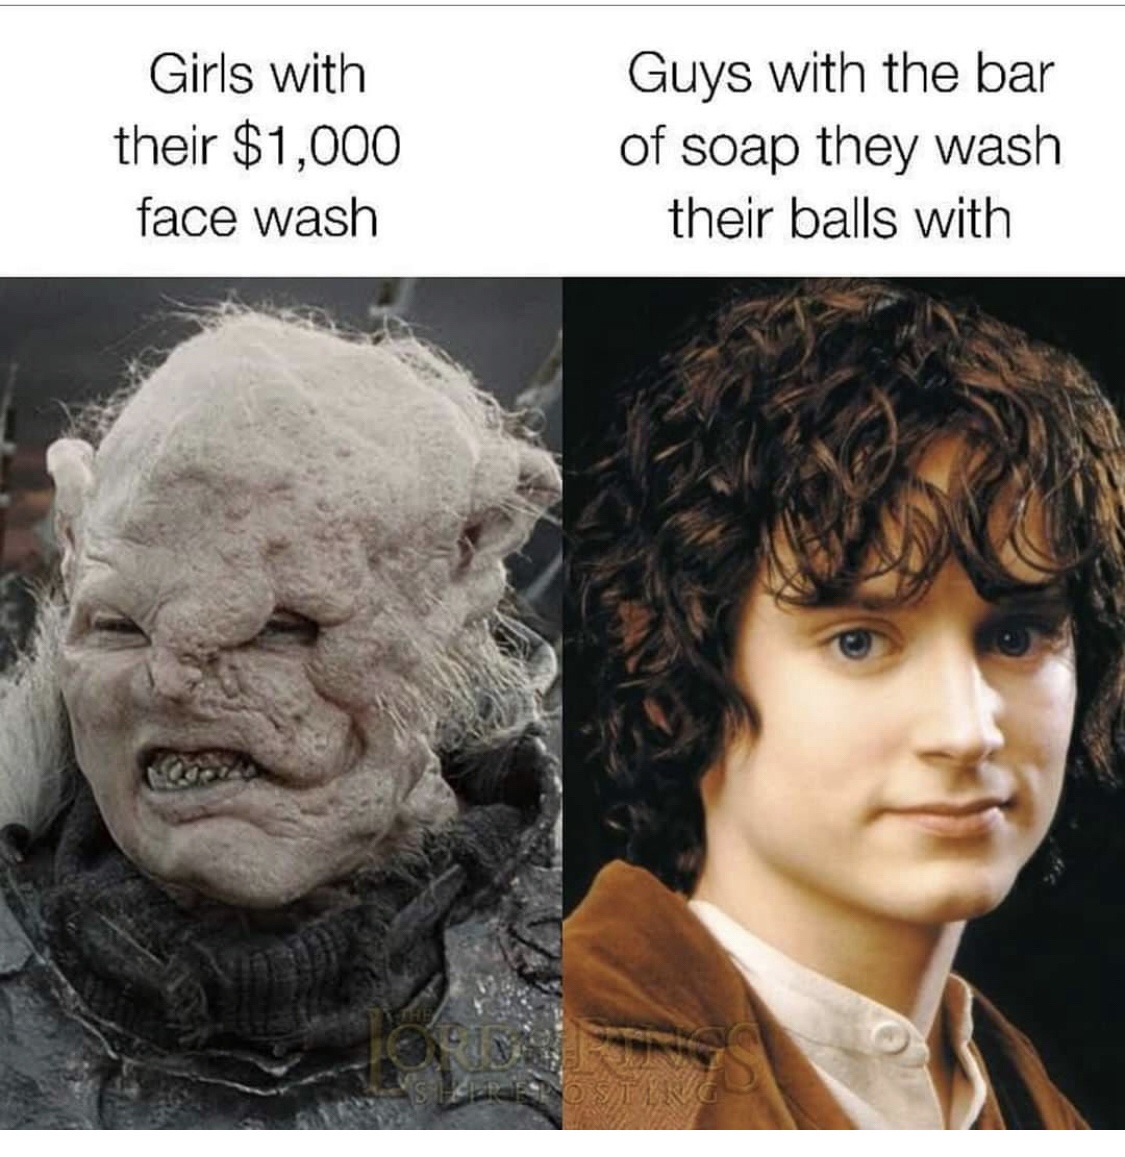 frodo baggins - Girls with their $1,000 face wash Guys with the bar of soap they wash their balls with O Stang